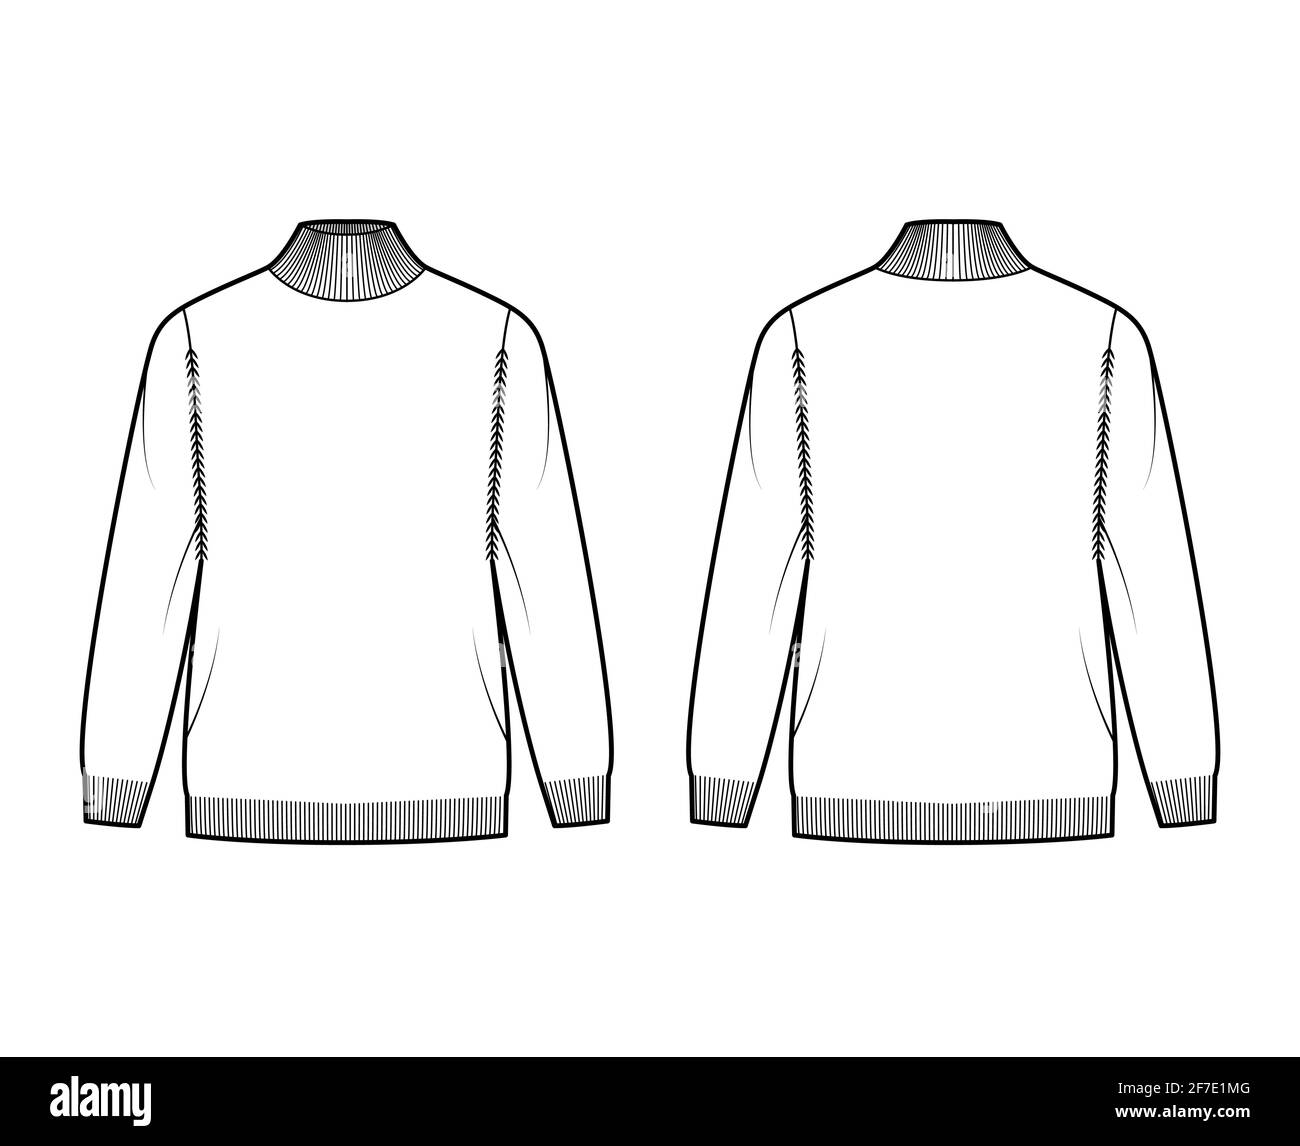 Turtleneck Sweater technical fashion illustration with long sleeves, oversized, fingertip length, knit rib trim. Flat jumper apparel front, back, white color style. Women, men unisex CAD mockup Stock Vector